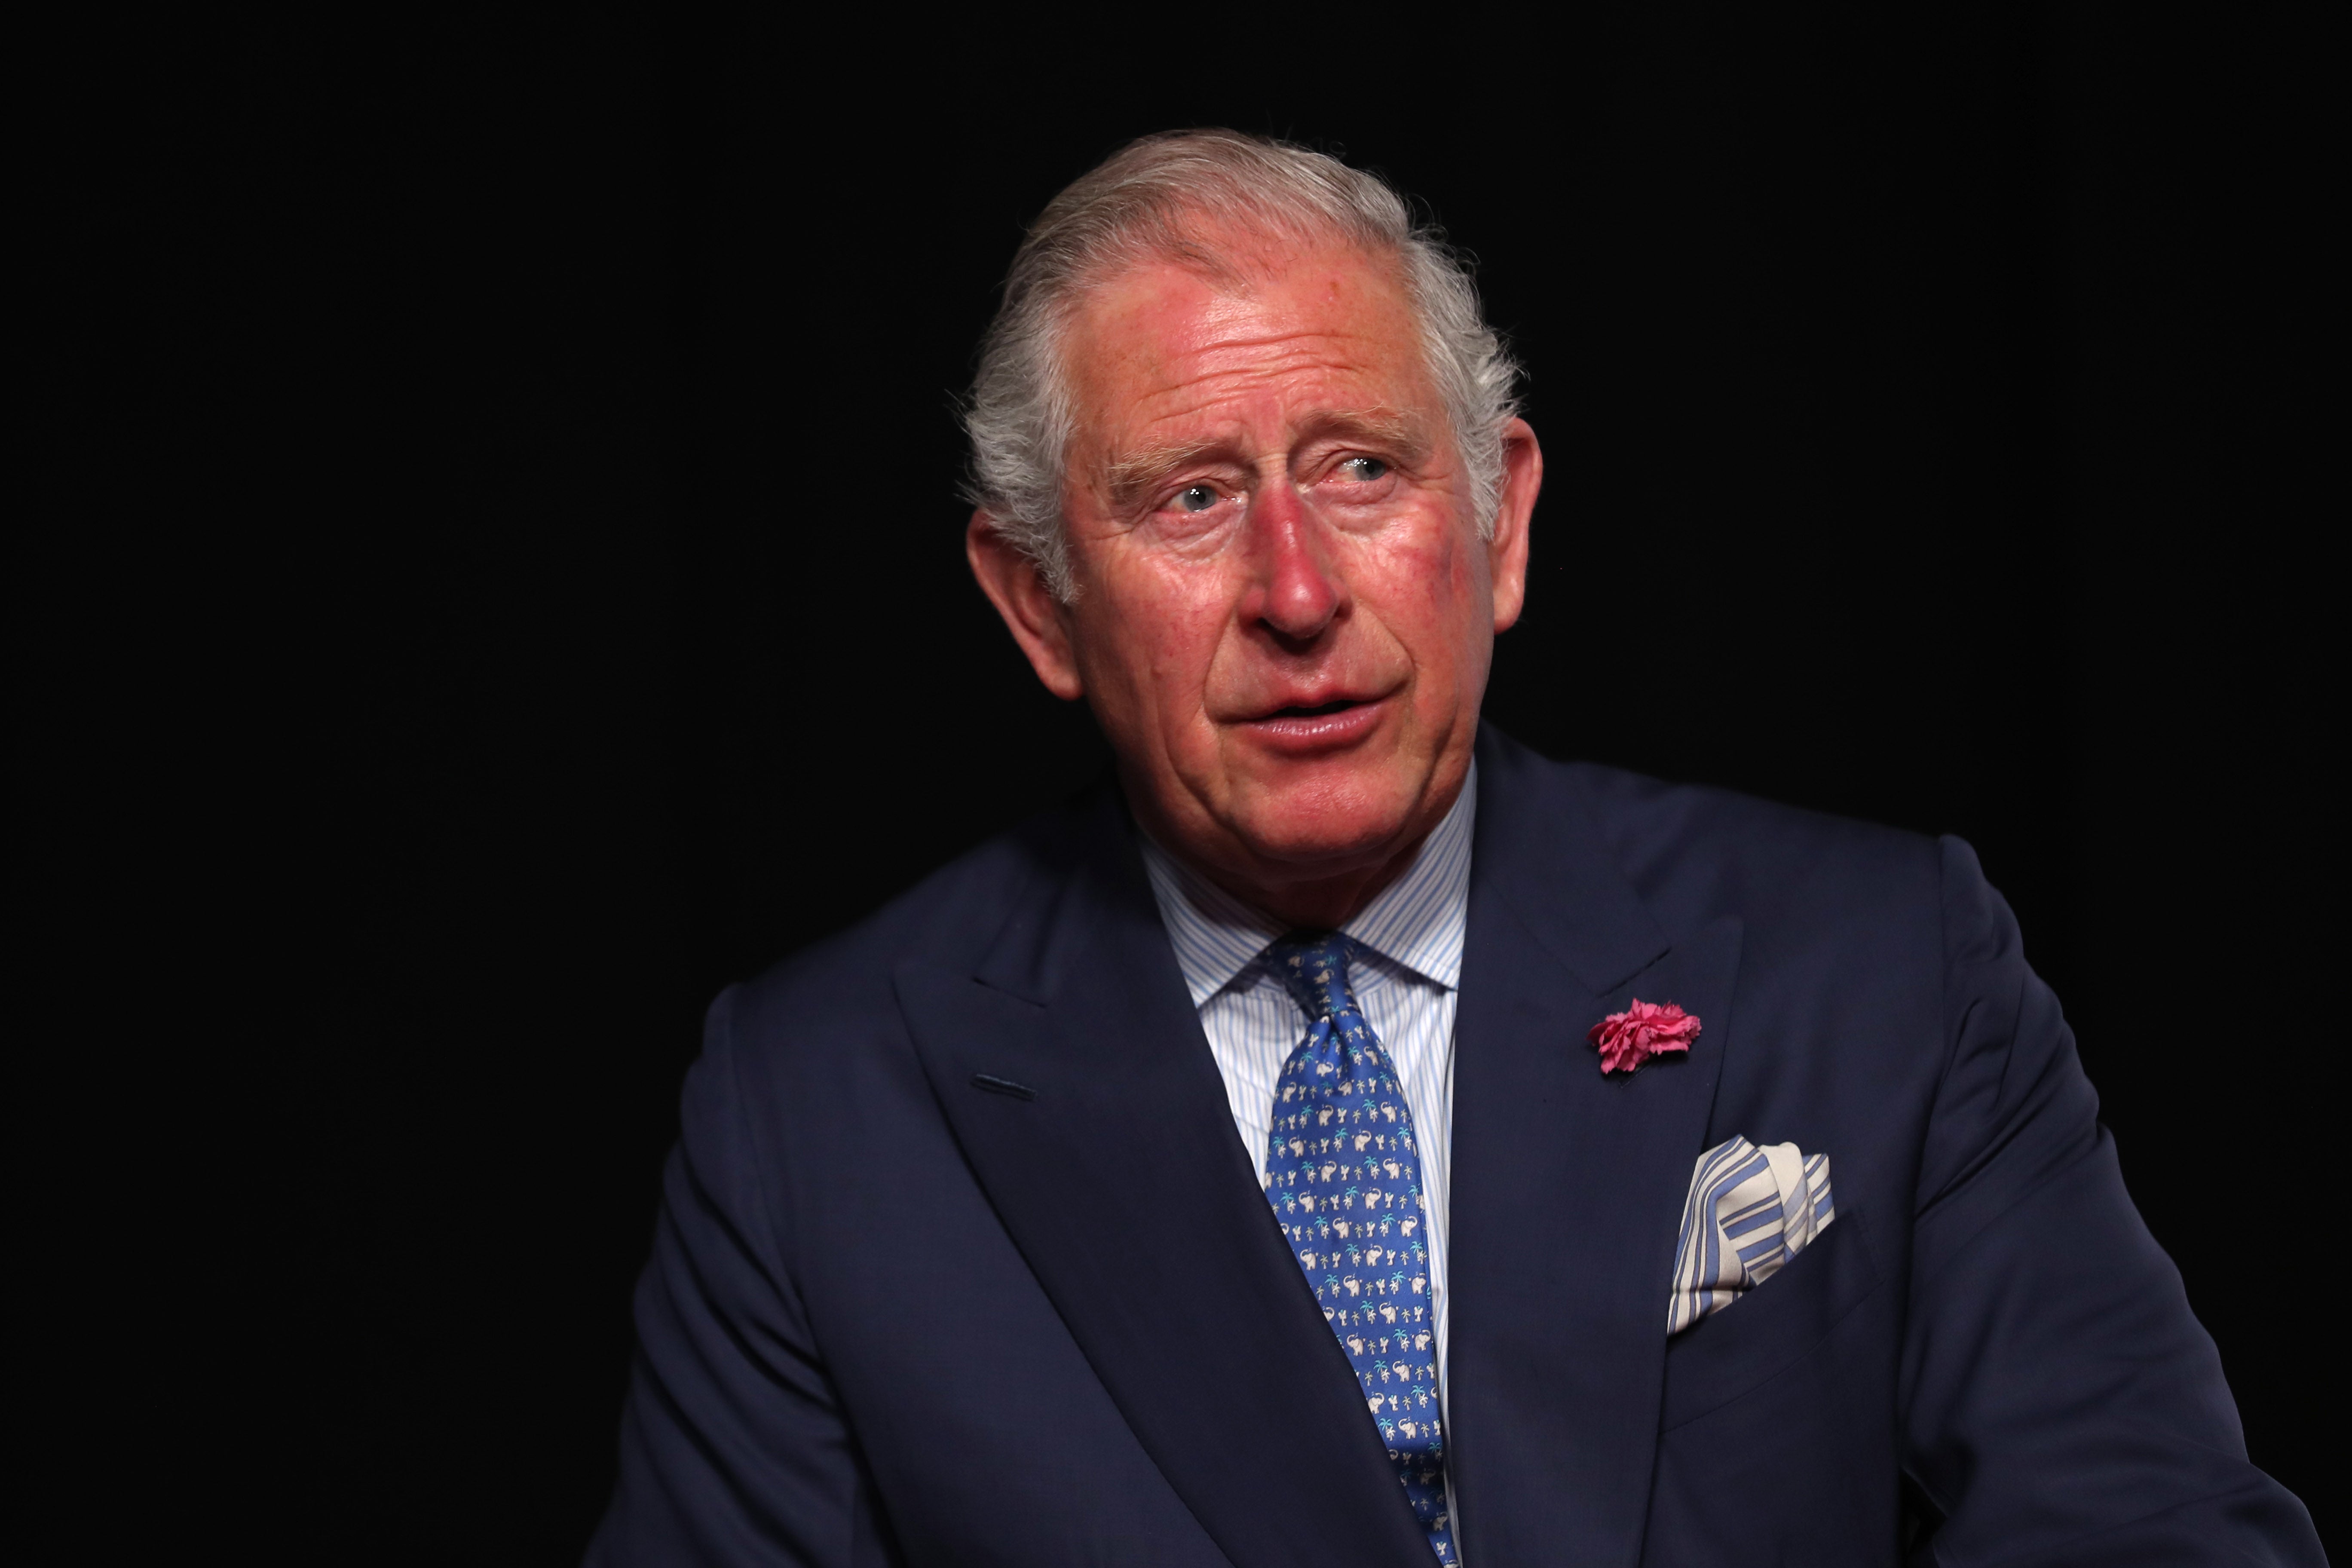 ‘The prince wants to bring people in to connect with the institution,’ said a royal source